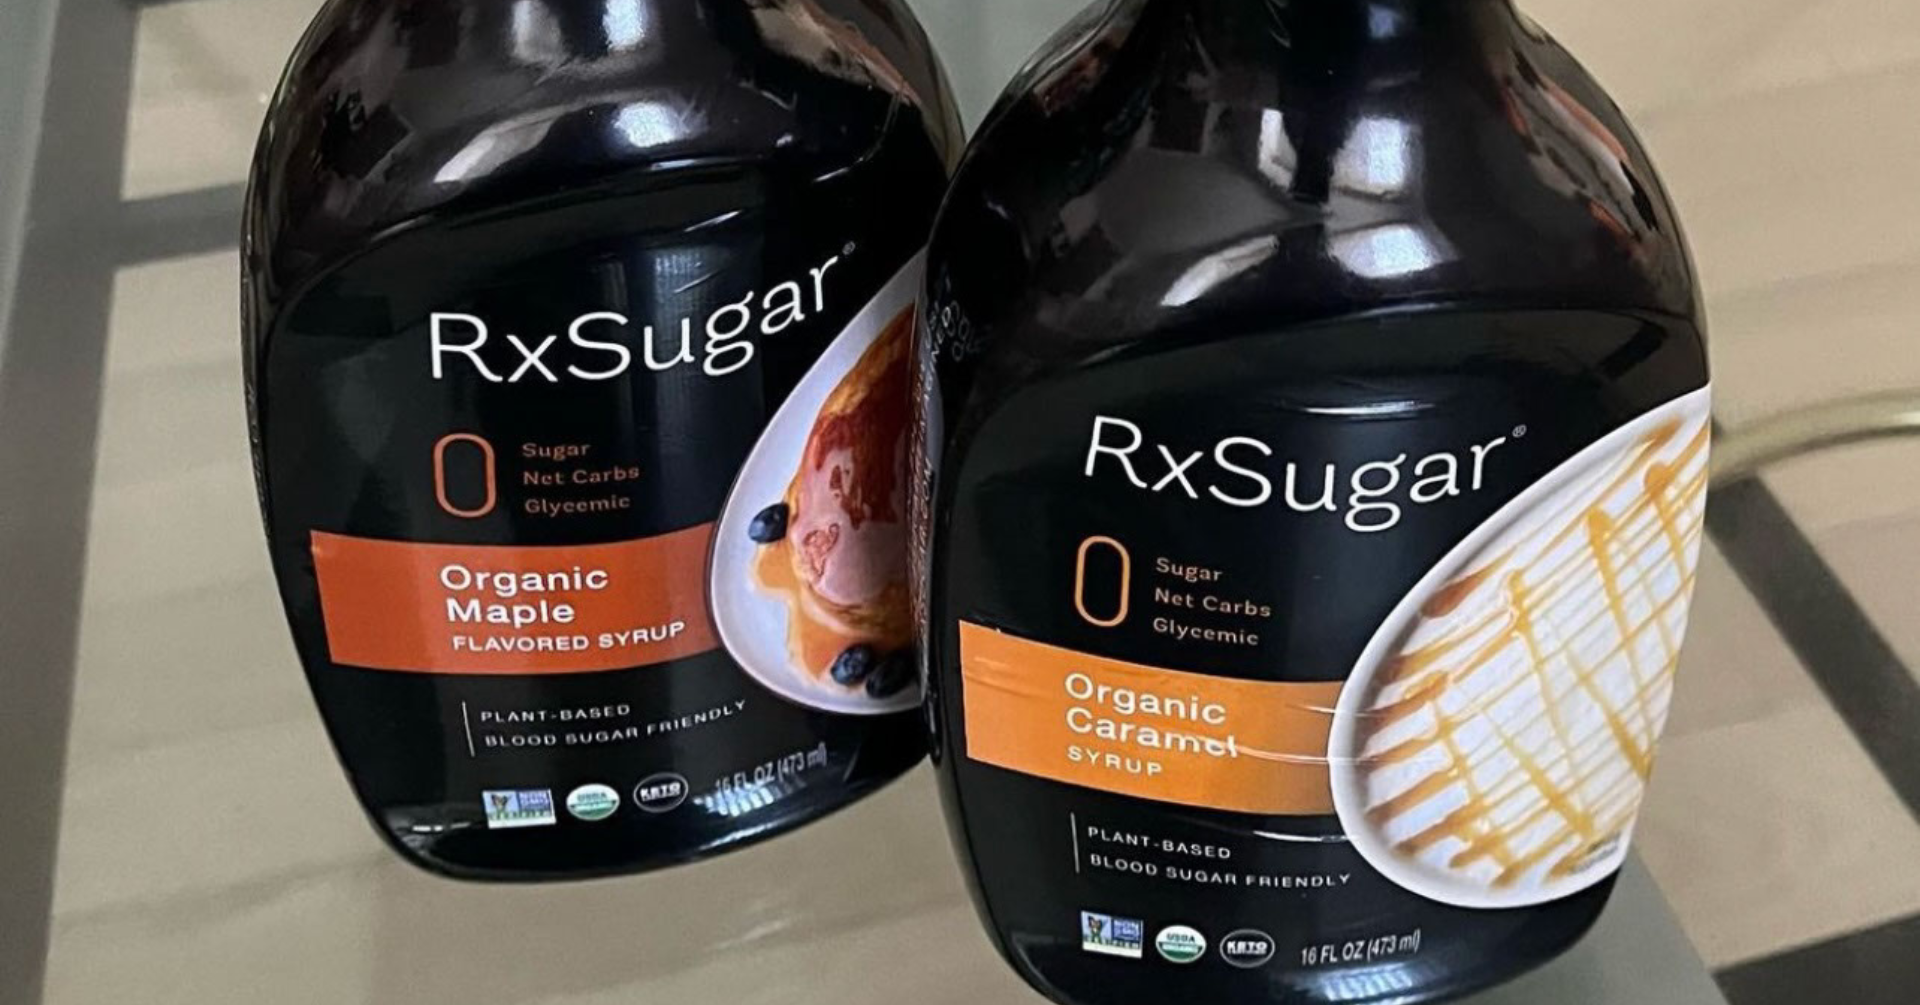 Scrumptious Keto Excited About Her New RxSugar!